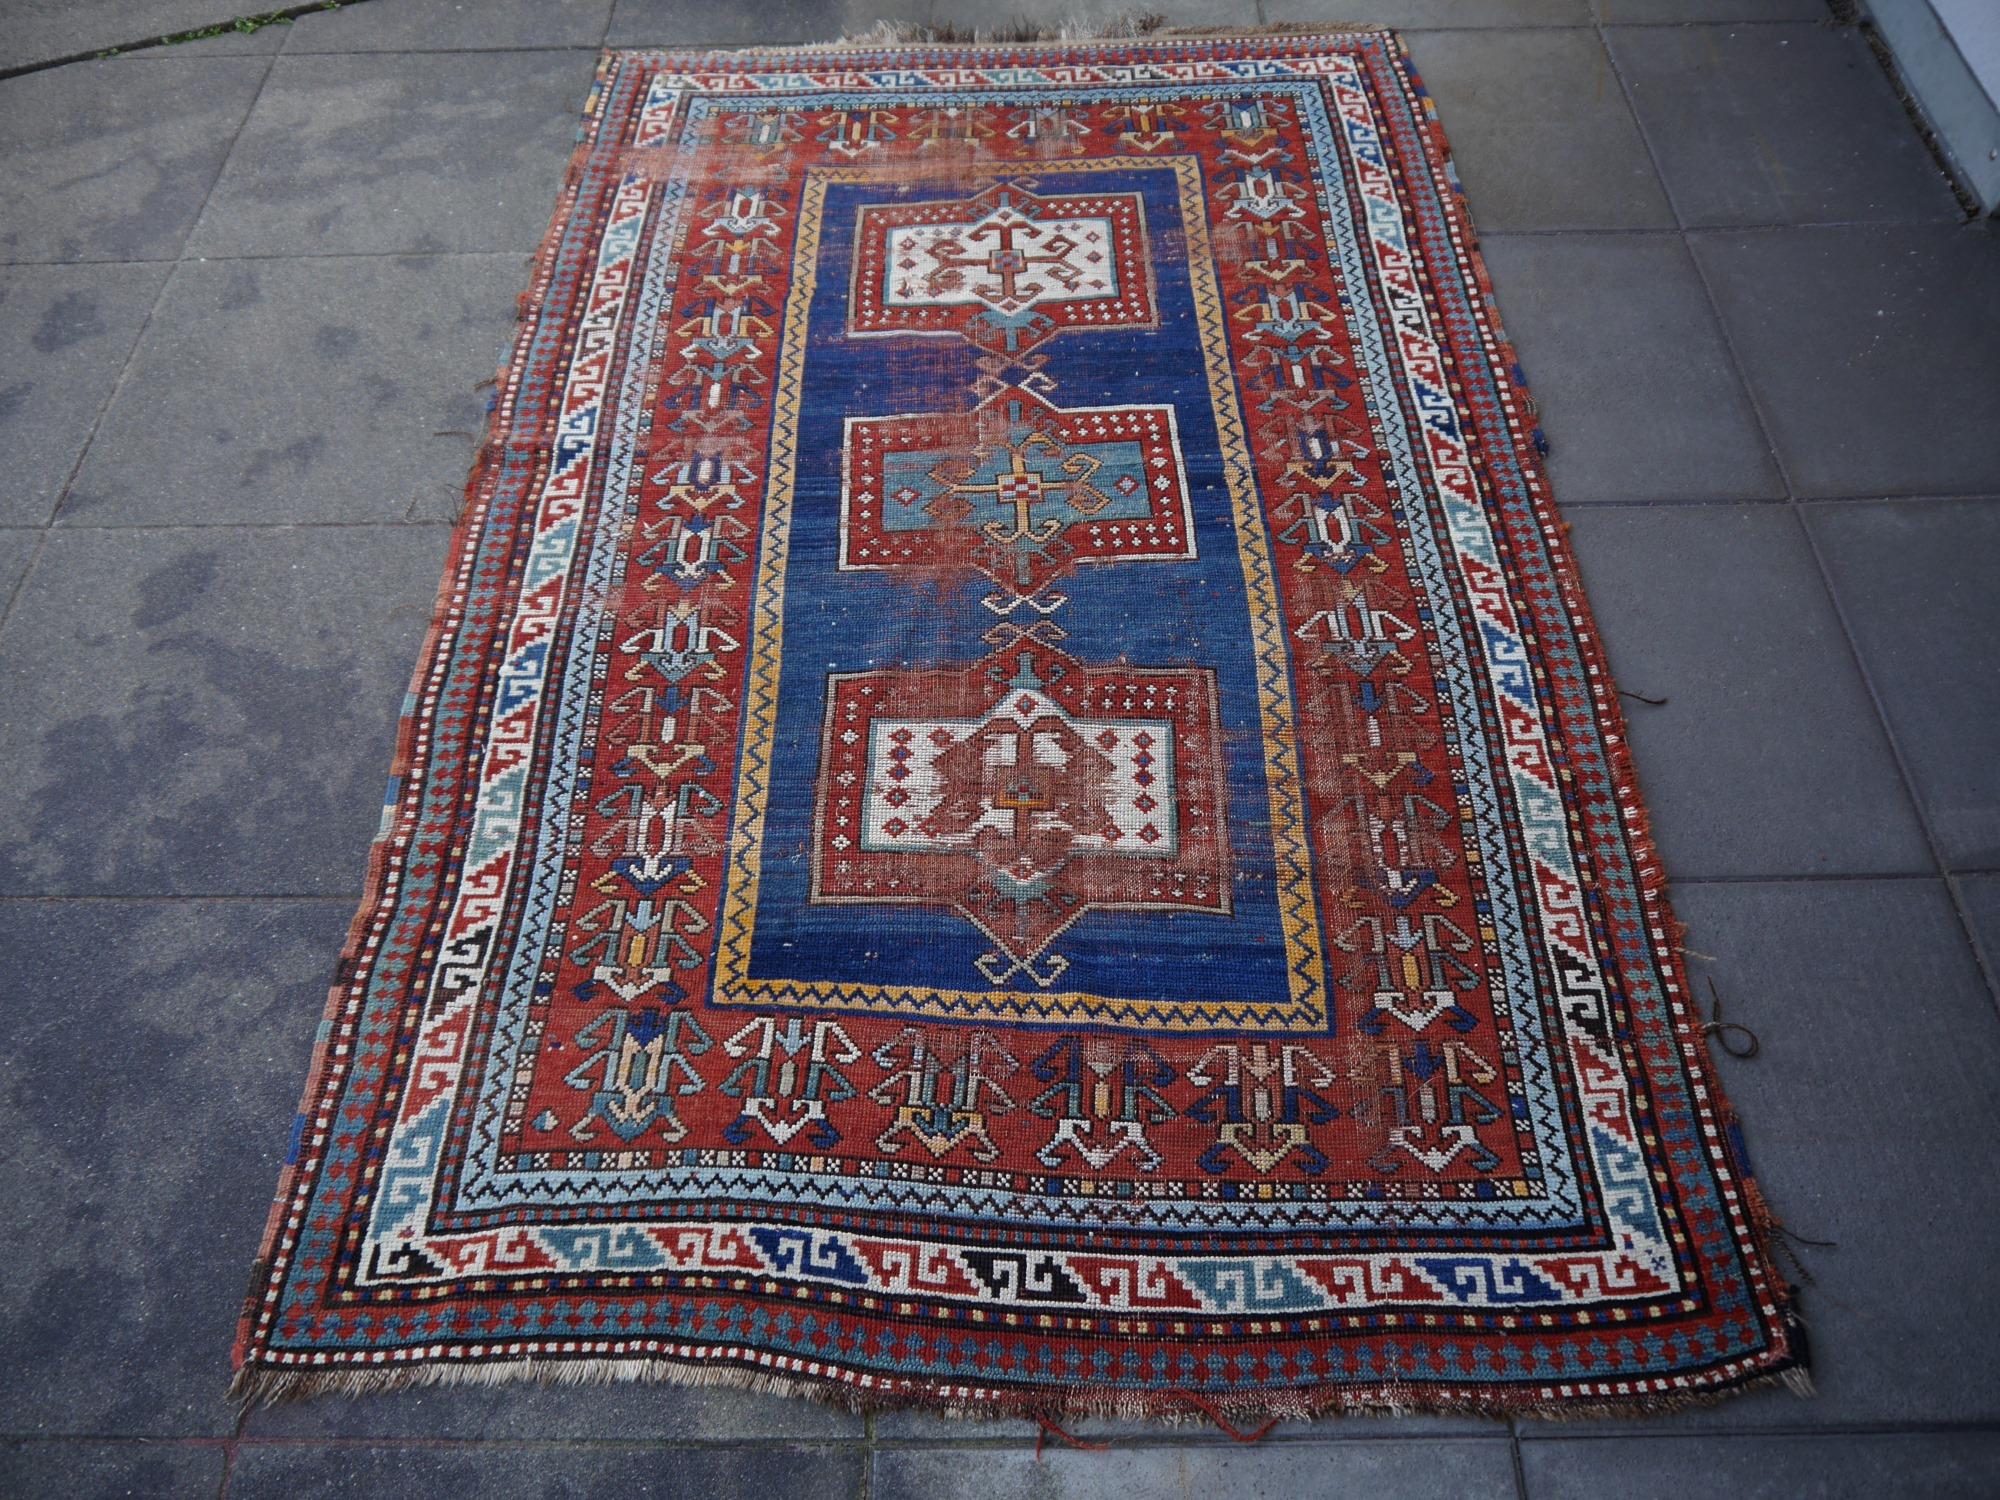 A mall sized Kazak rug from Azerbaijan with geometric design. The pile is made of wool - hand spun, hand dyed with all vegetable dyes and knotted by women in a tribal style. The rug is very decorative, the condition is distressed with the looked